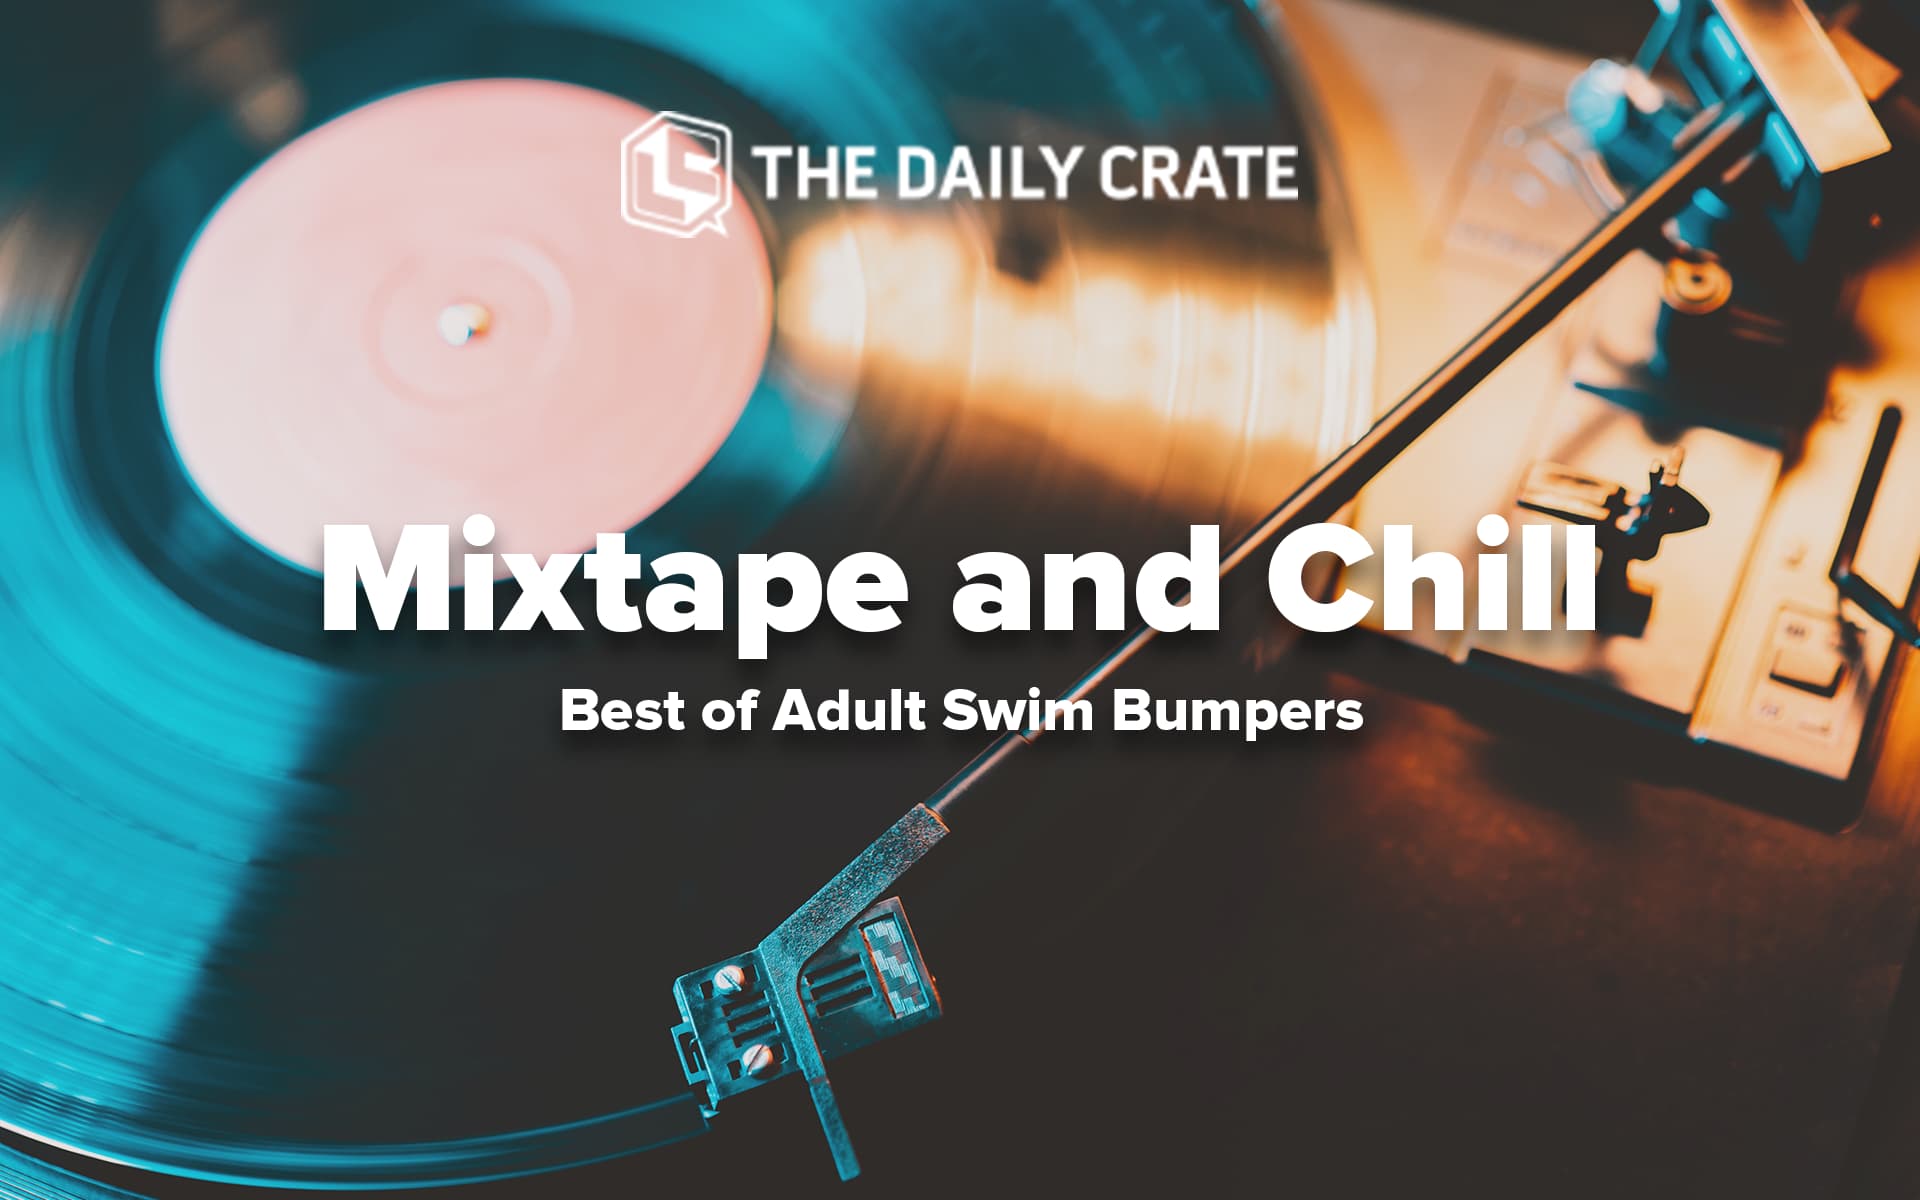 PLAYLIST: MIXTAPE and Chill – Best of Adult Swim Bumpers